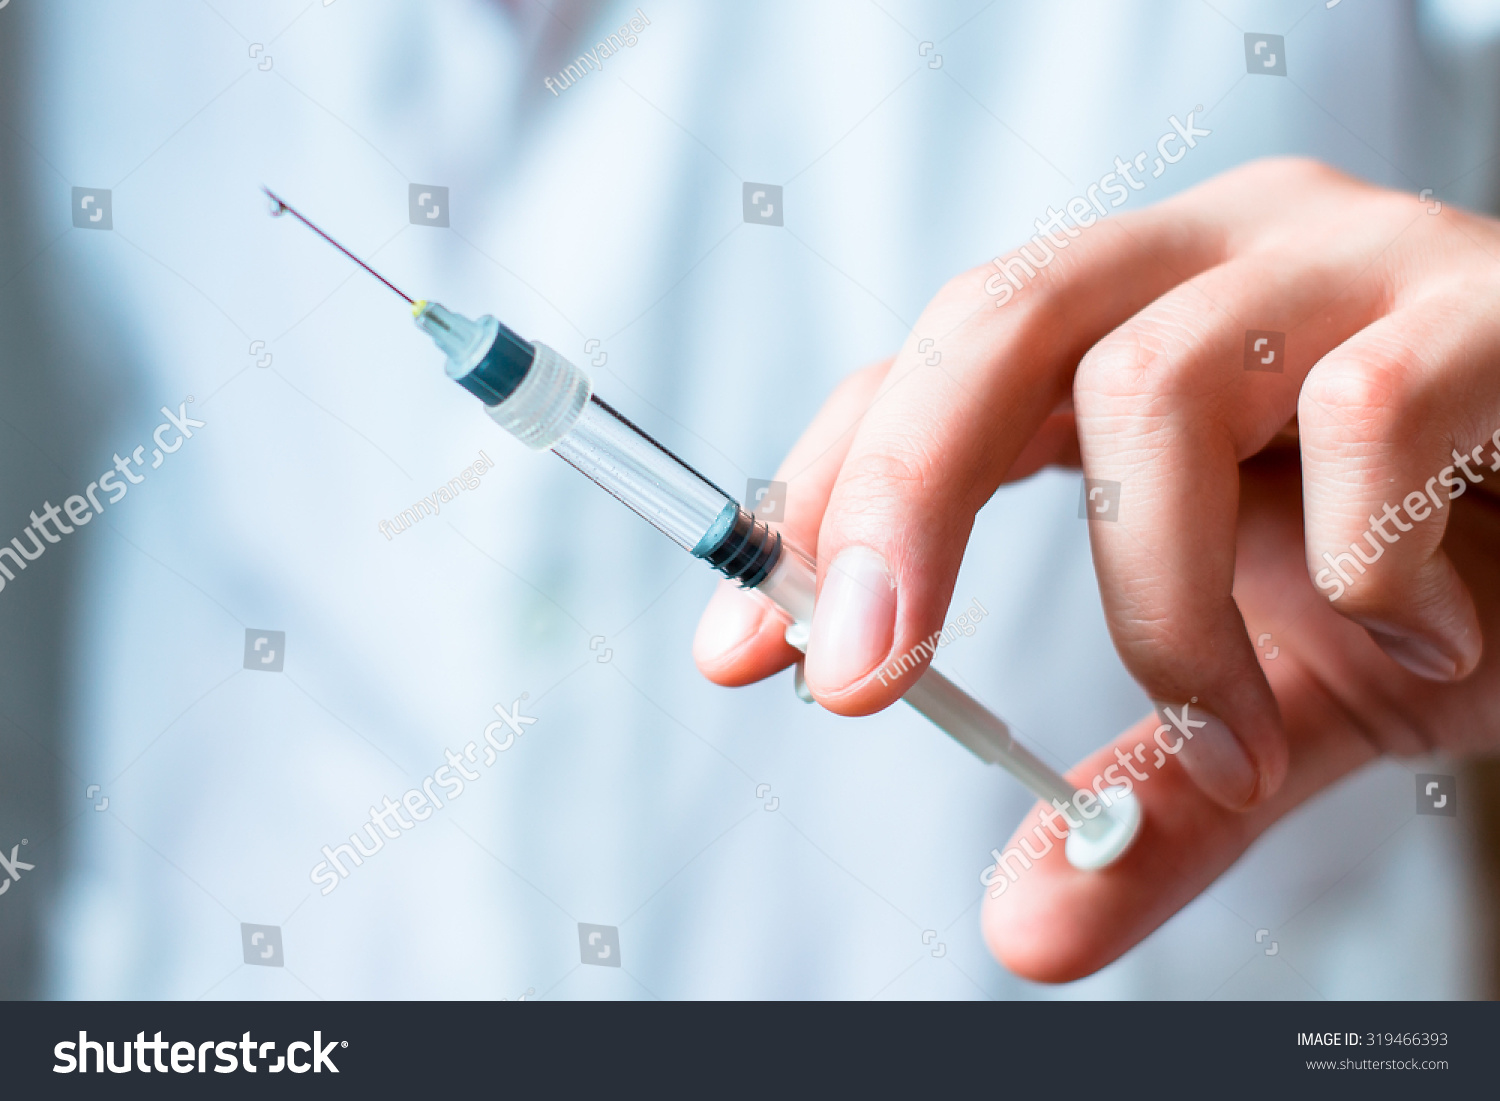 Syringe, medical injection in hand, palm or fingers. Medicine plastic vaccination equipment with needle. Nurse or doctor. Liquid drug or narcotic. Health care in hospital. #319466393